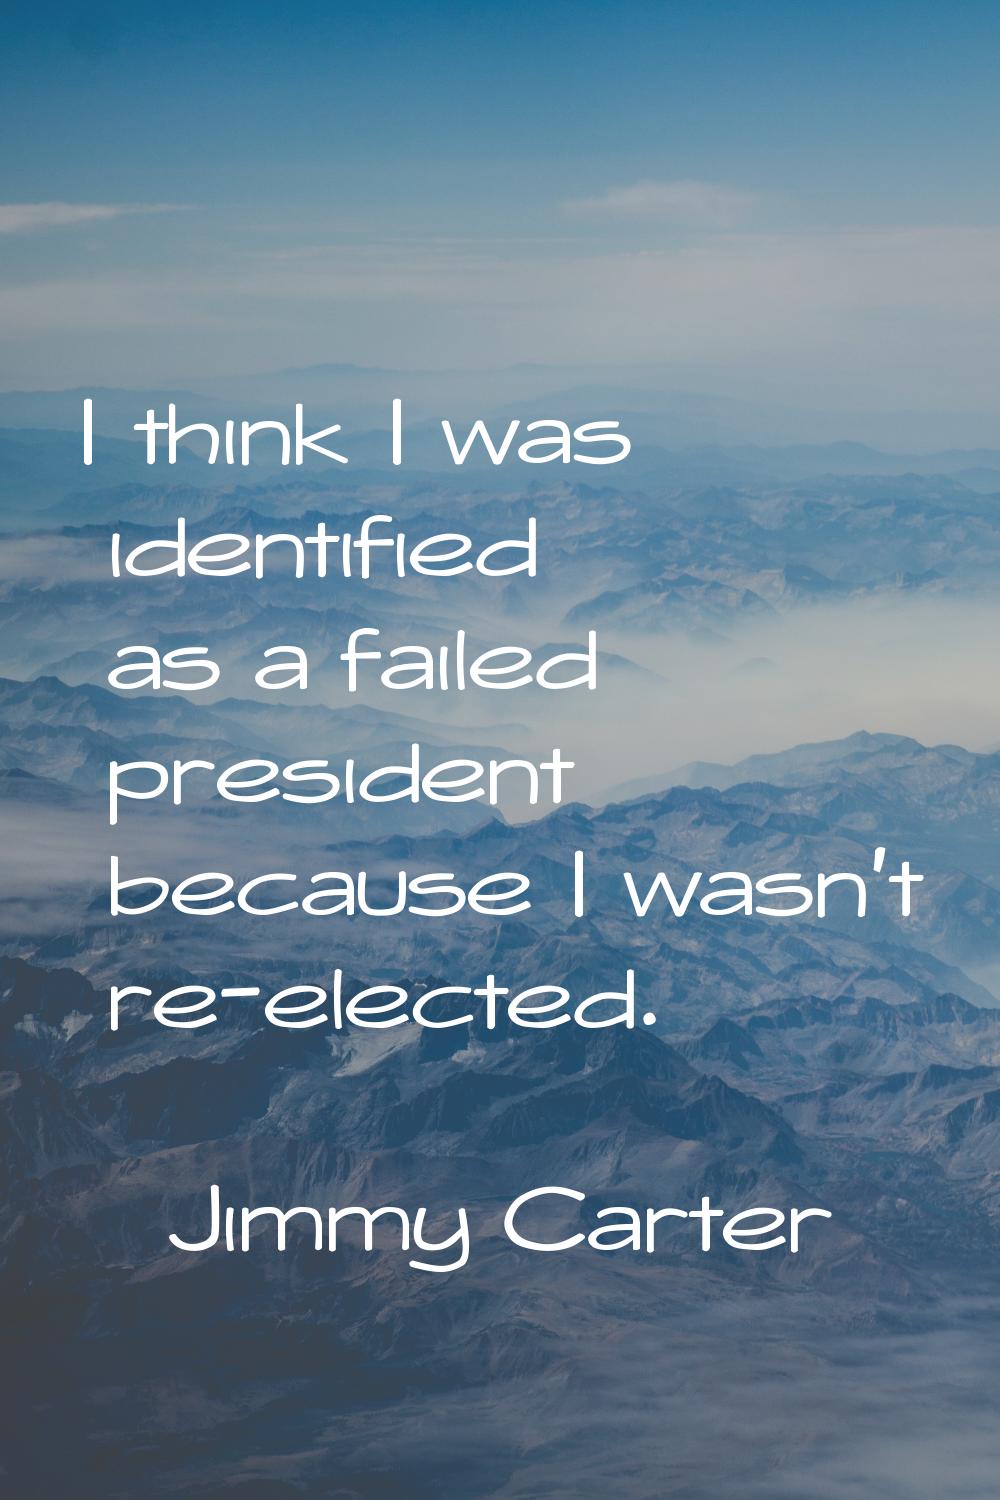 I think I was identified as a failed president because I wasn't re-elected.